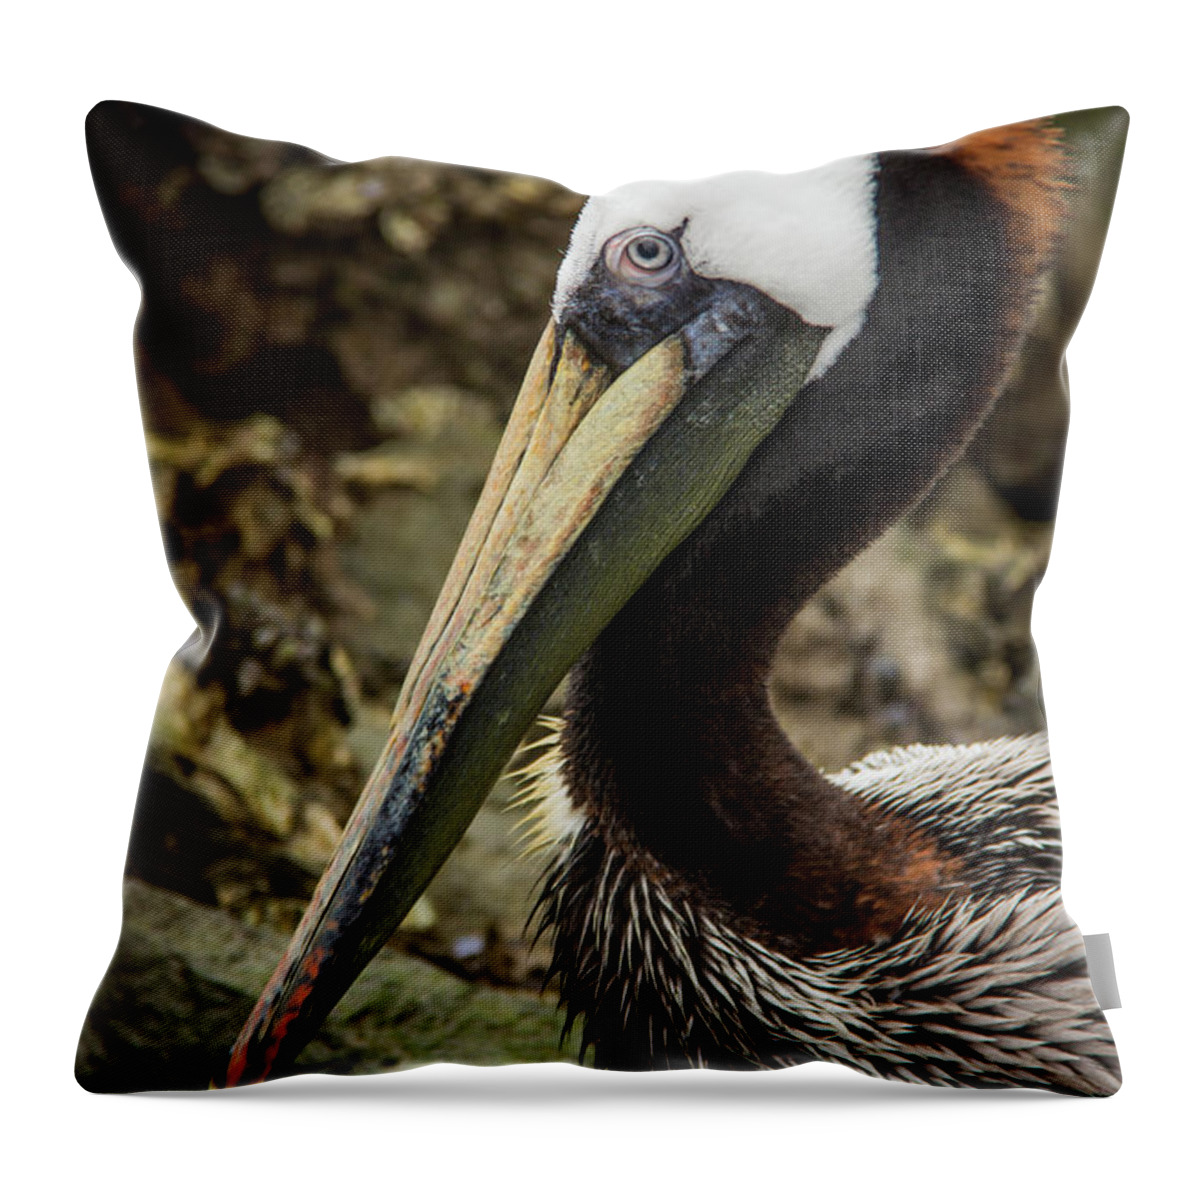 2016 Throw Pillow featuring the photograph Mr. Cool Wildlife Art by Kaylyn Franks by Kaylyn Franks